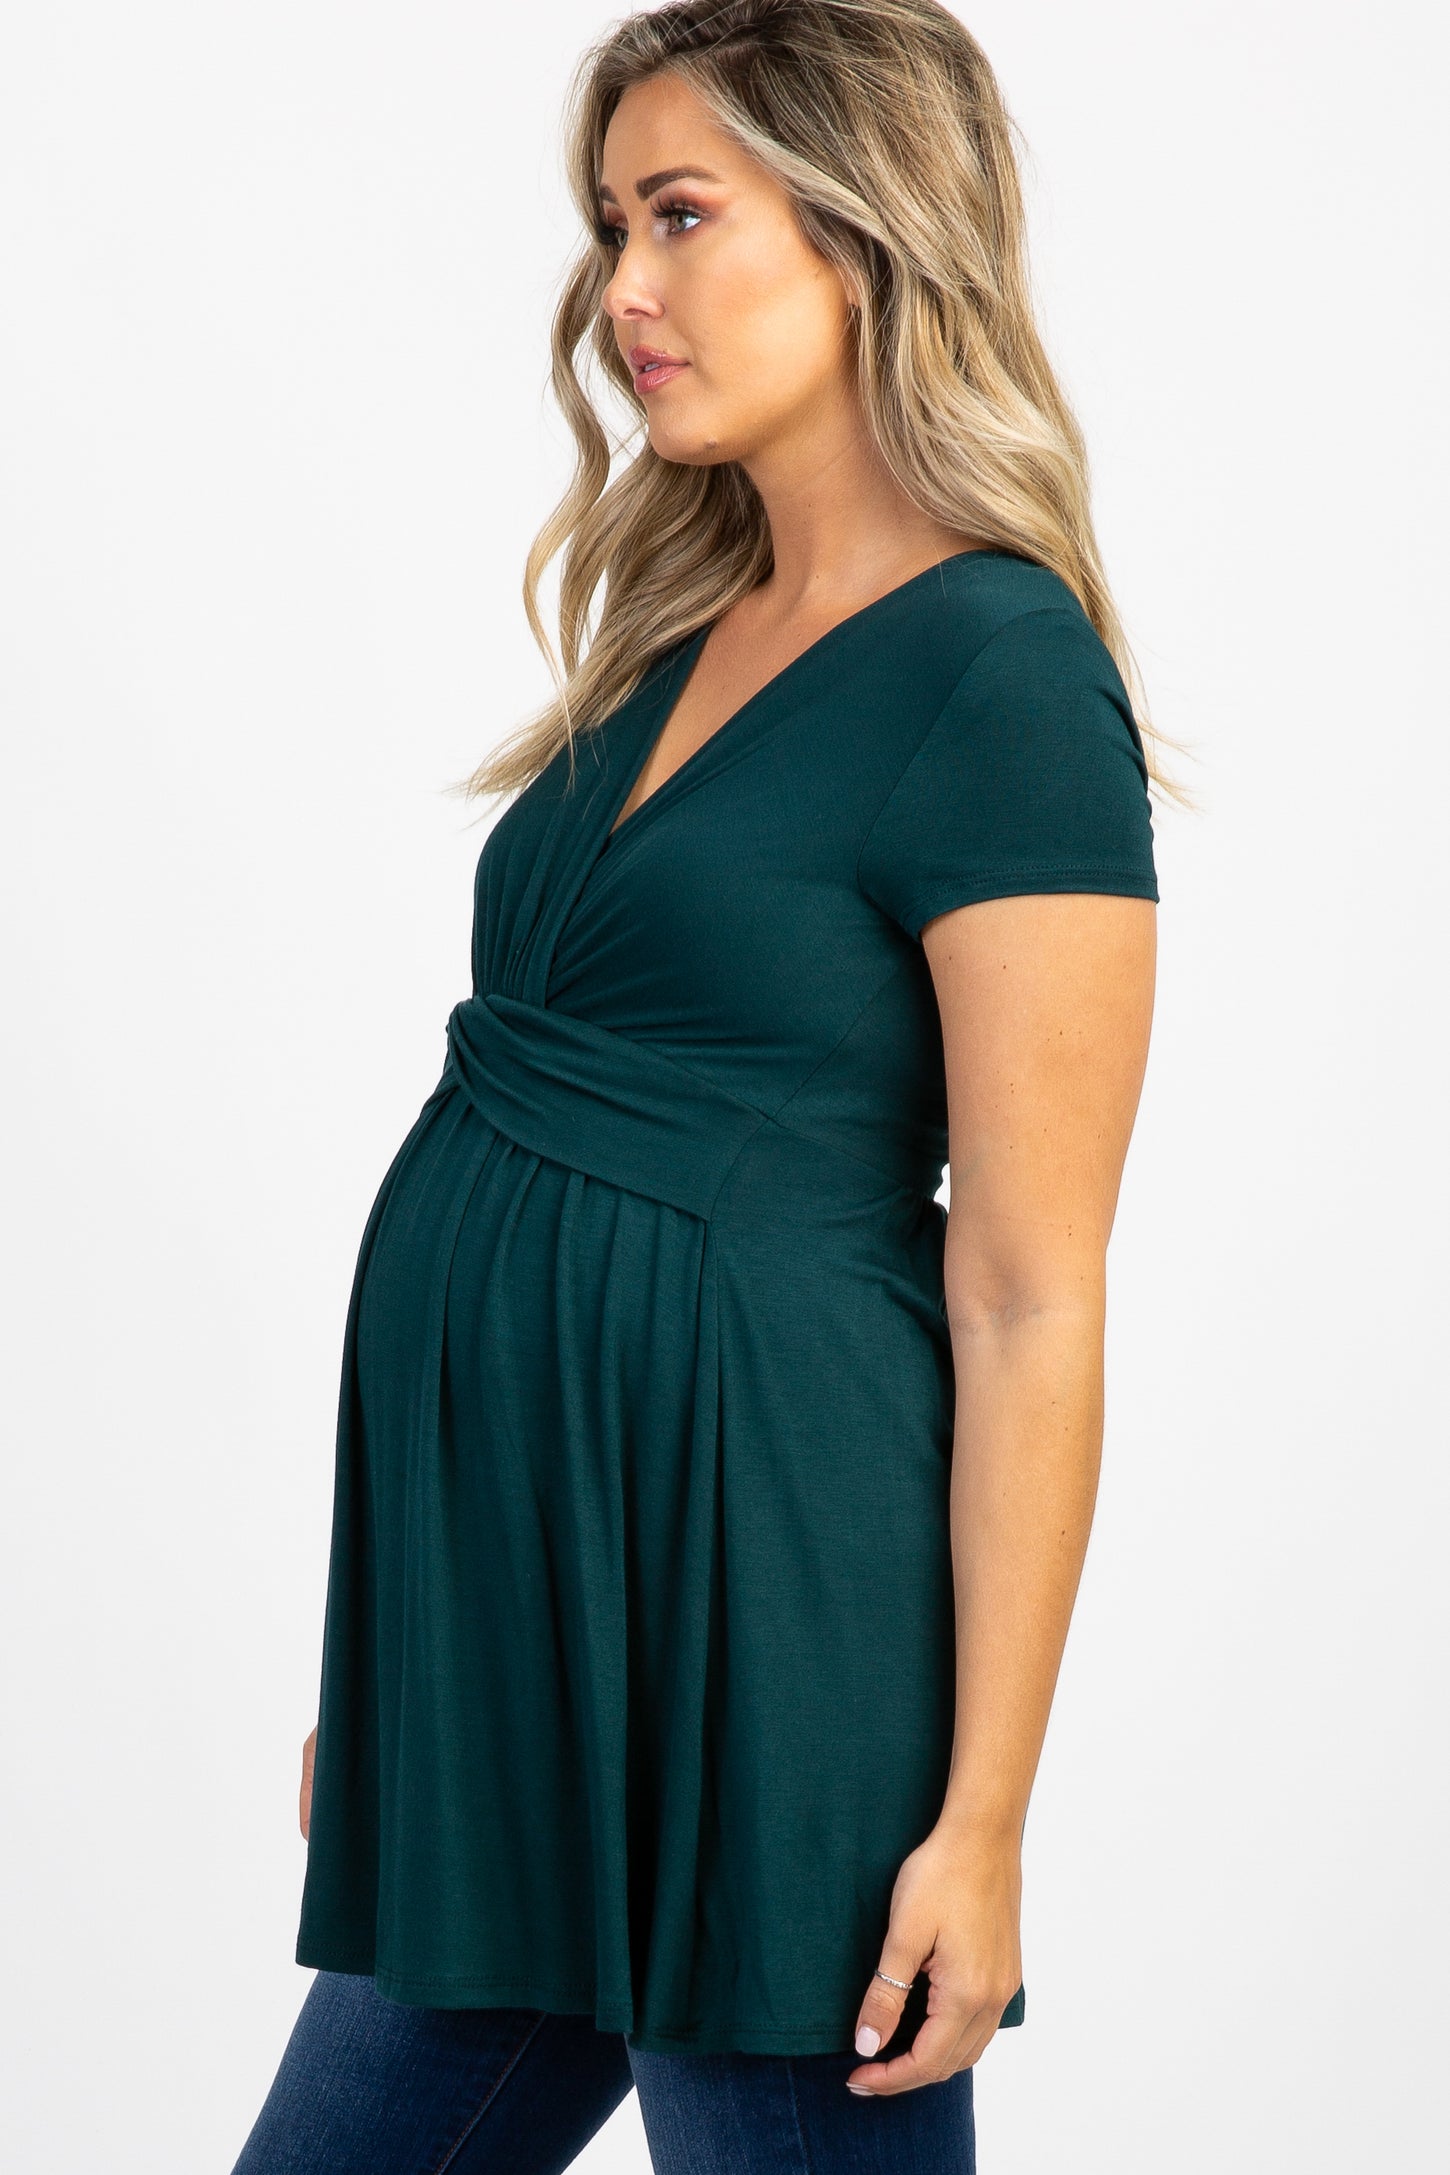 PinkBlush Forest Green Draped Front Maternity/Nursing Top